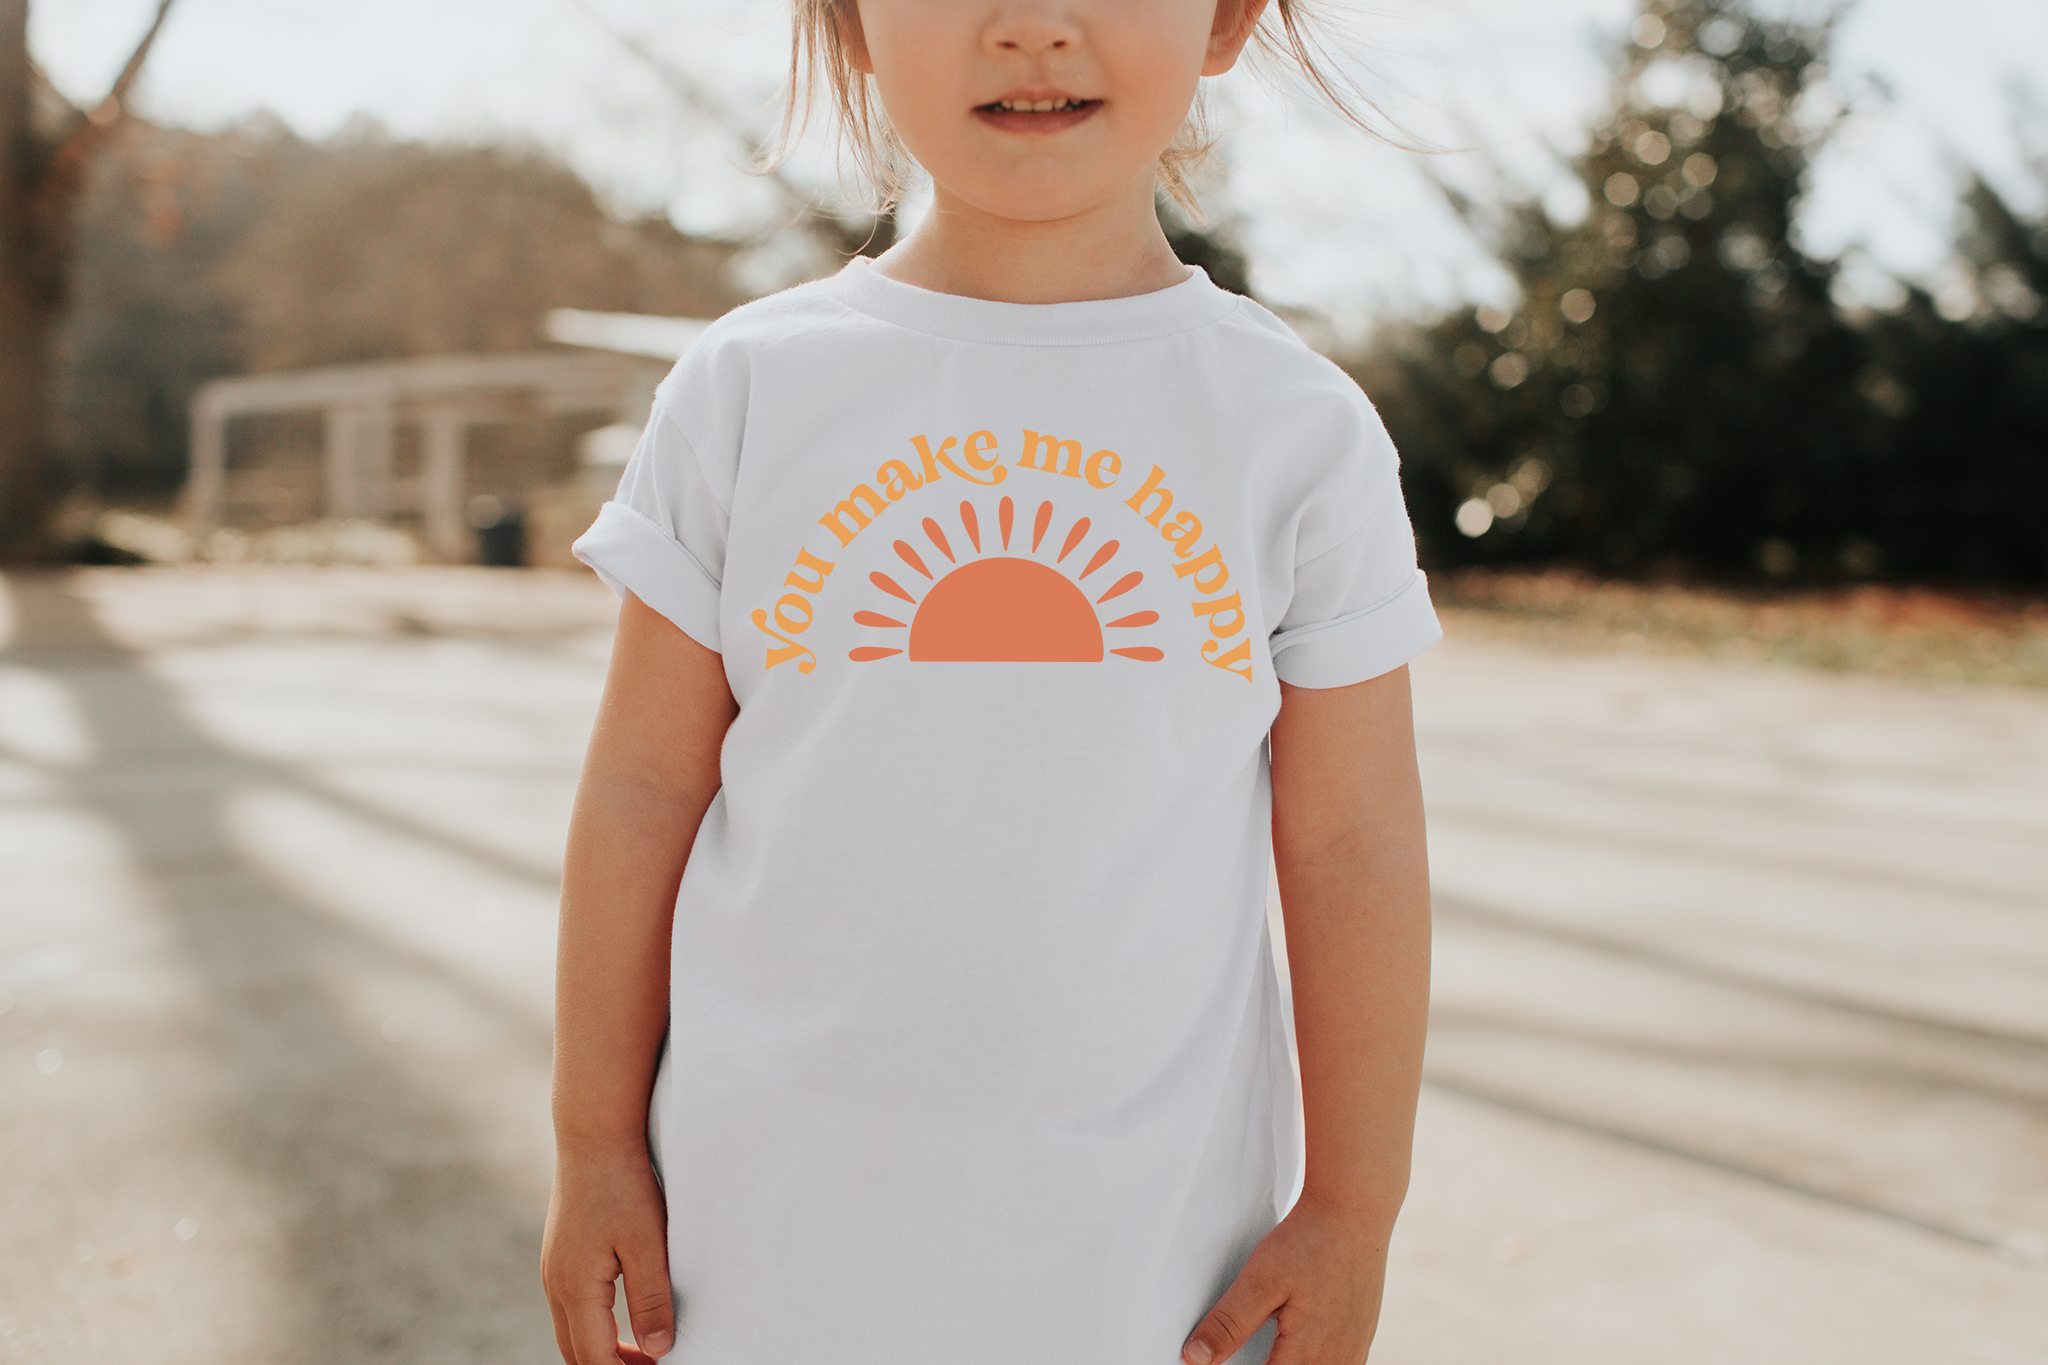 T-shirt bundles. Matching sibling outfit. Tees for toddlers and kids.